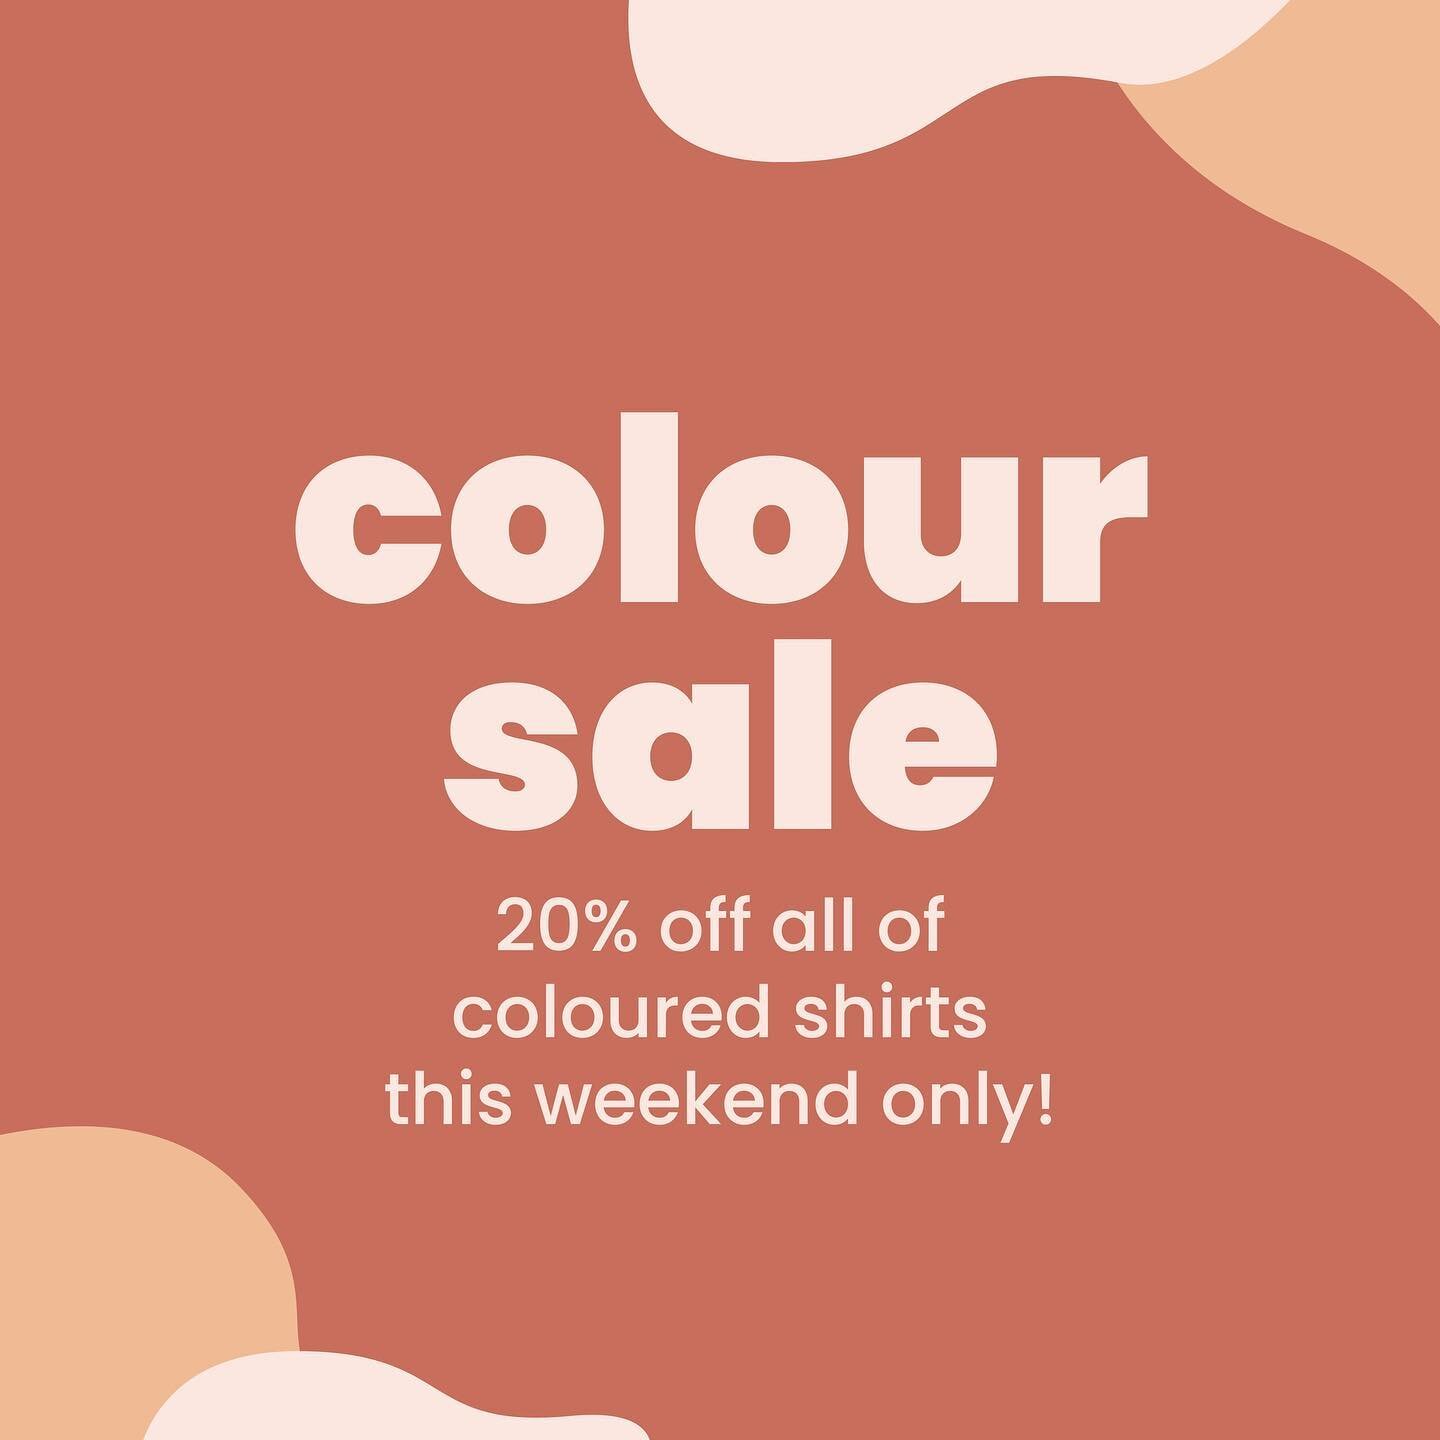 SALE! Take 20% off any of our coloured tshirts for the whole family with code COLOUR20 🤍 The sale runs until Monday at noon so get your shop on! 

Excludes black, white, grey and natural shirts.